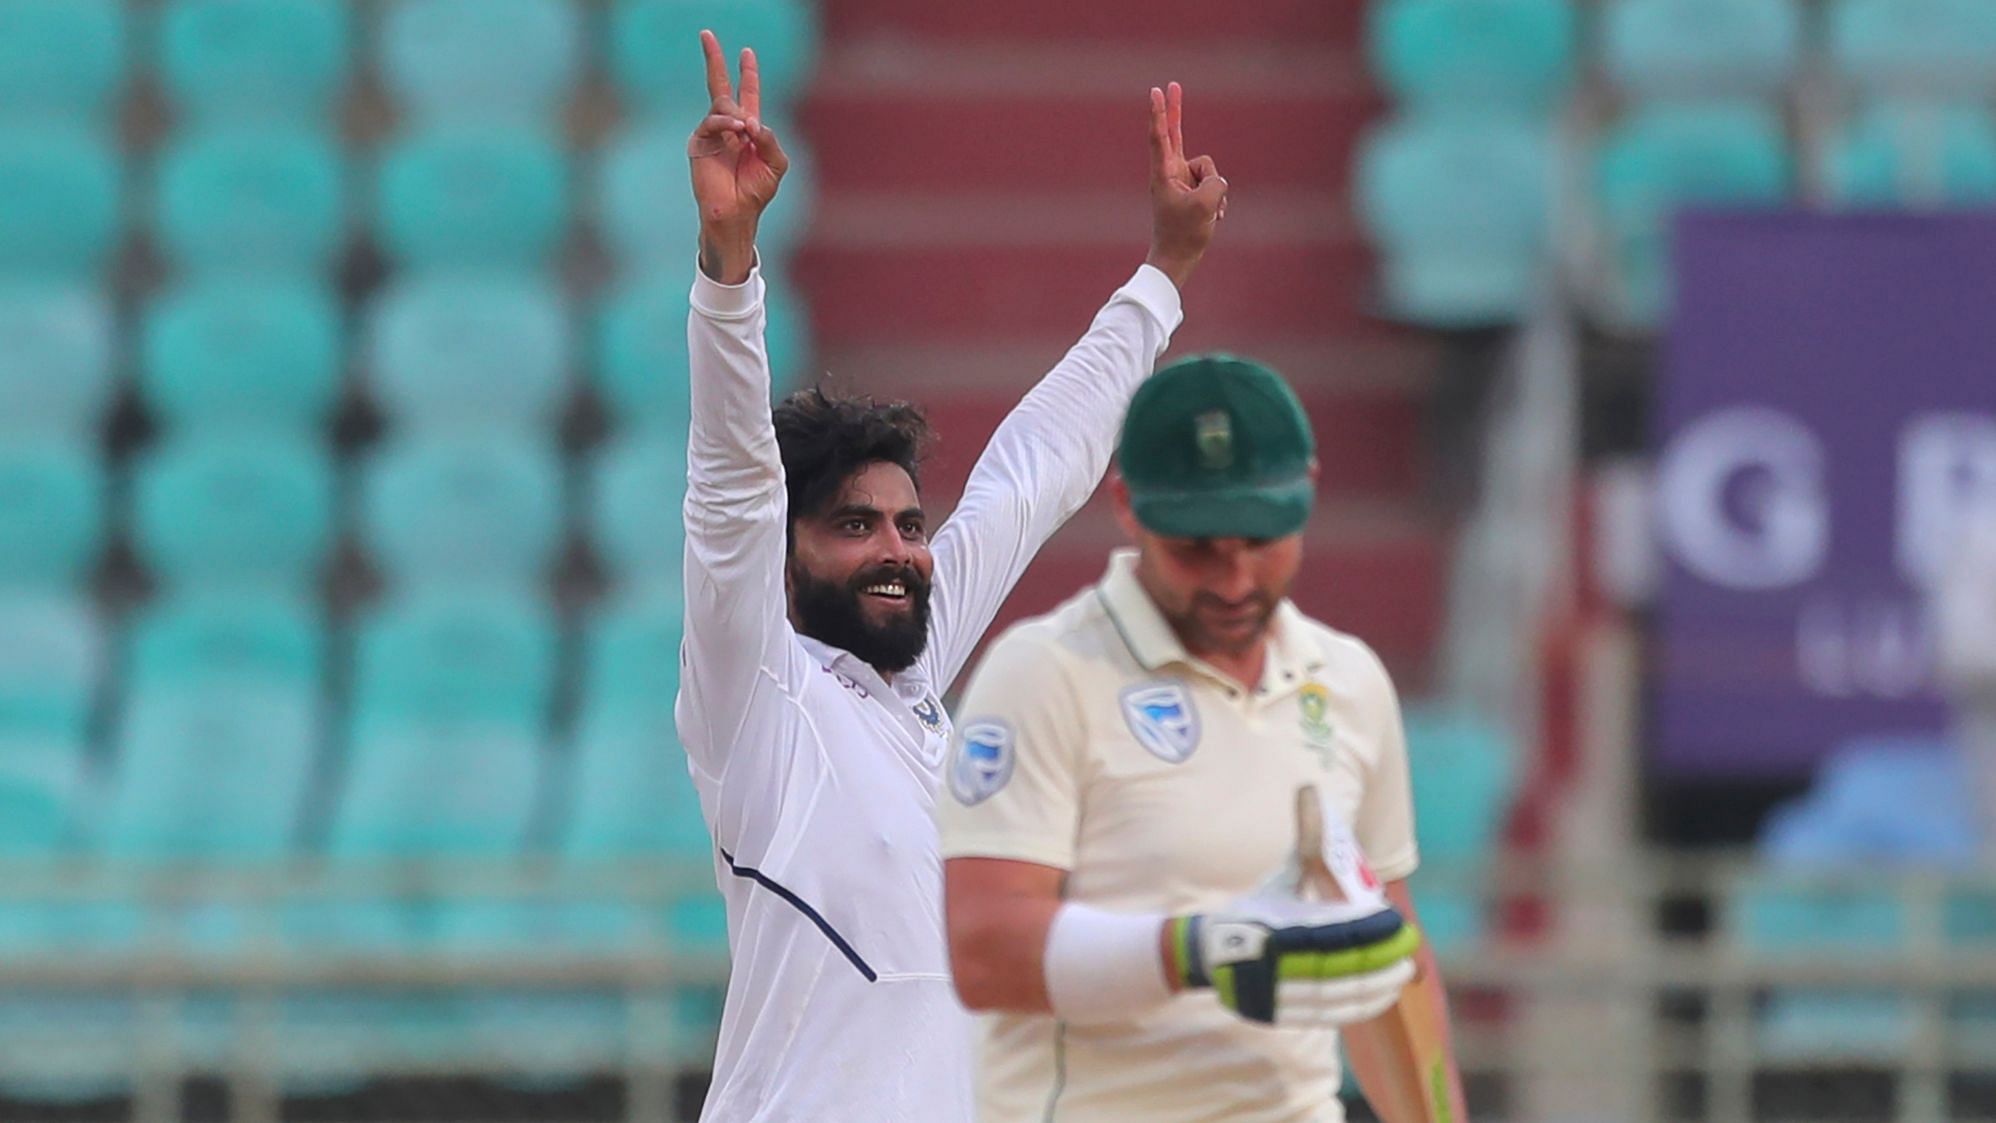 Left-arm spinner Ravindra Jadeja became the second fastest Indian to scalp 200 Test wickets.